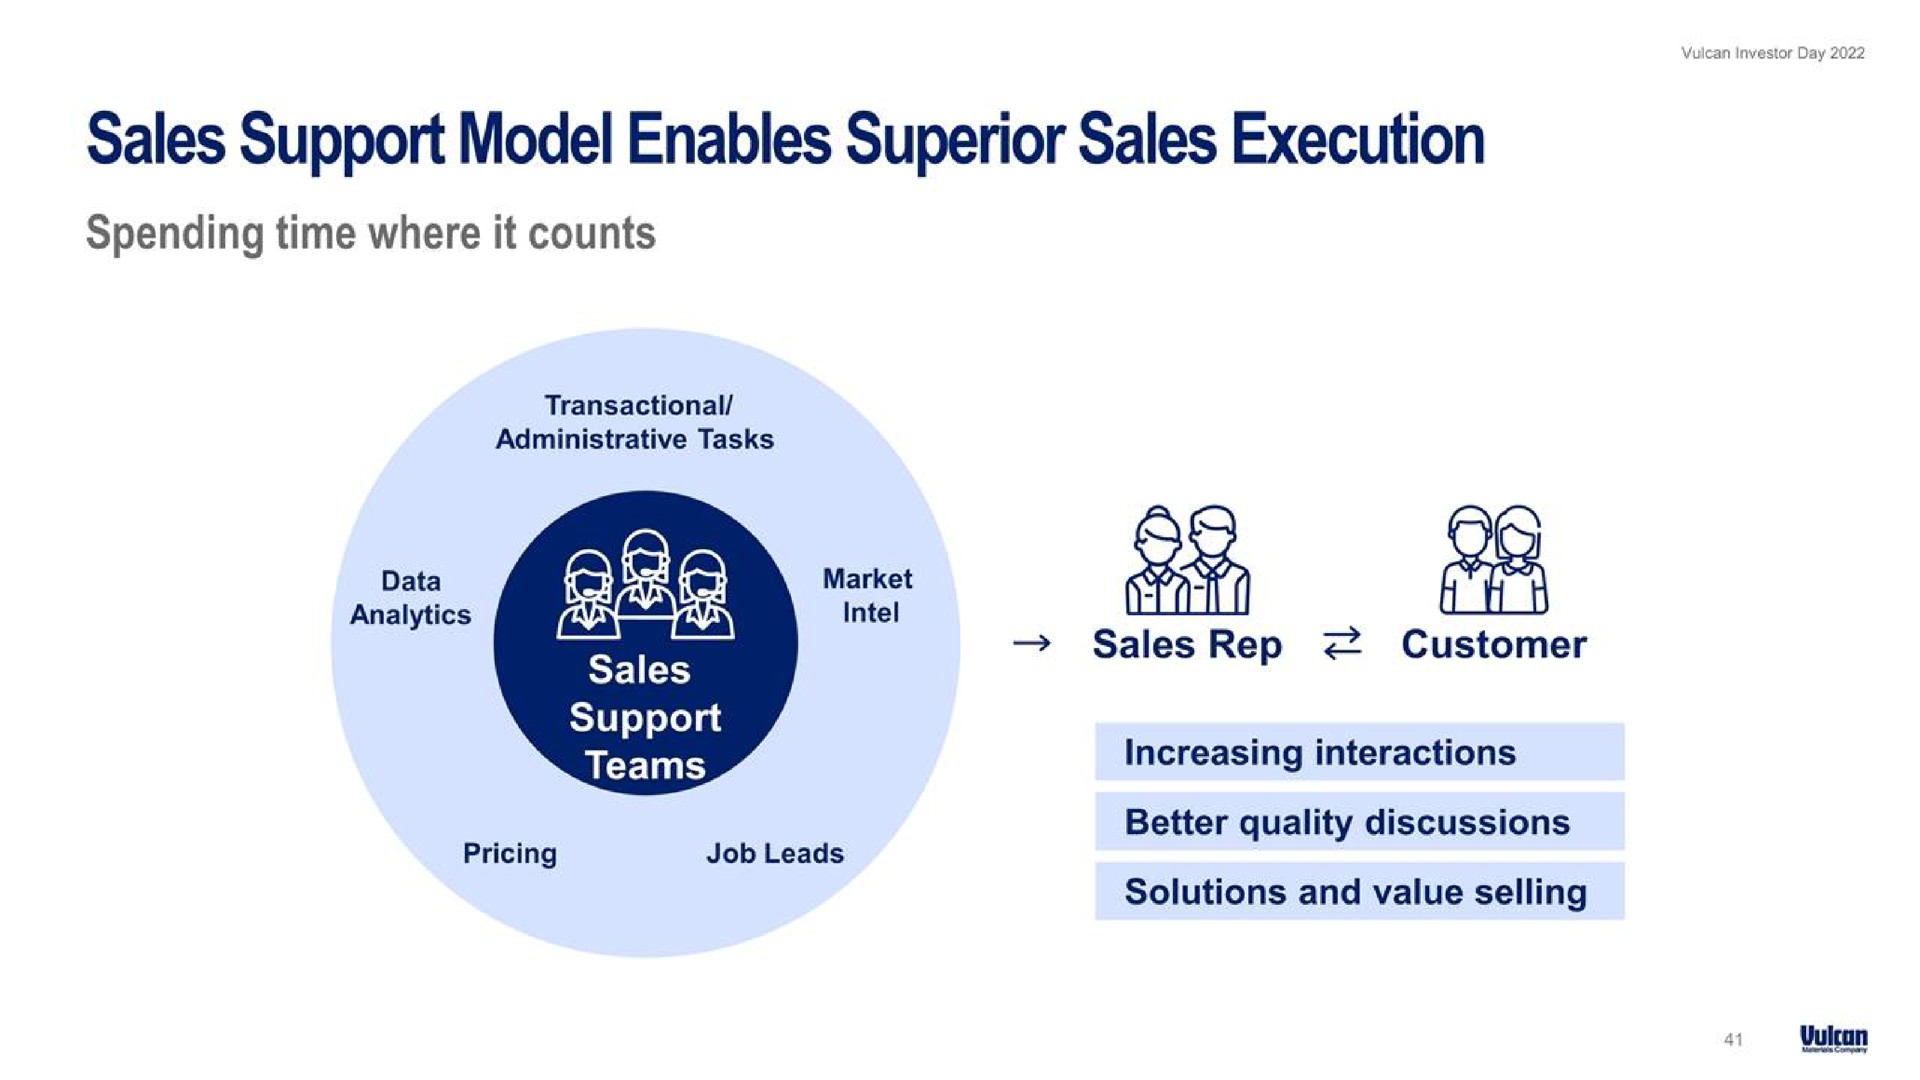 sales support model enables superior sales execution | Vulcan Materials